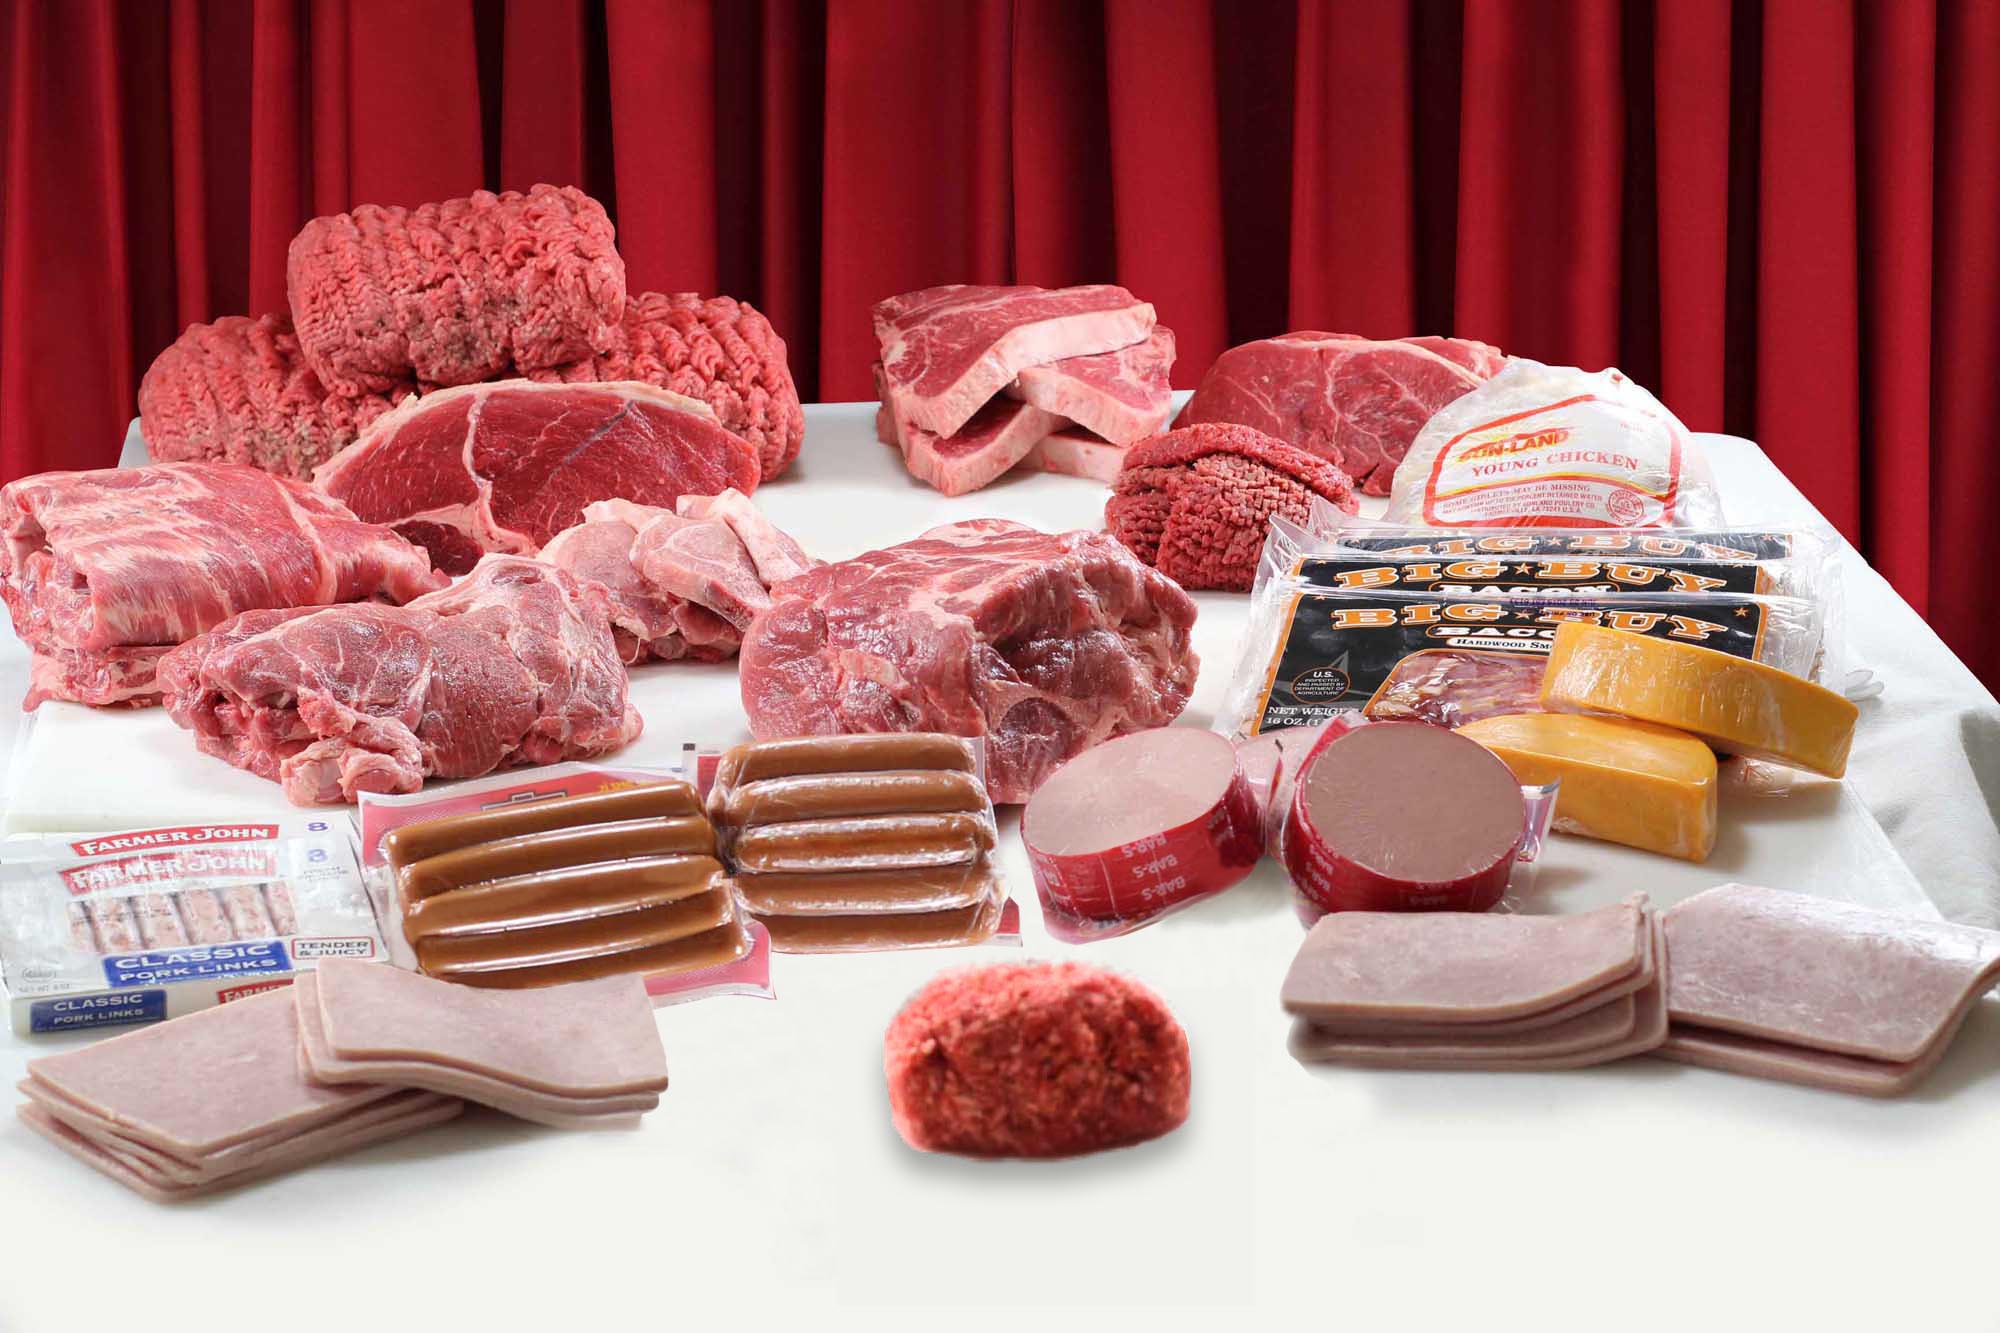 This image icon displays the Purdy's Quality Meats Coupon 2 image